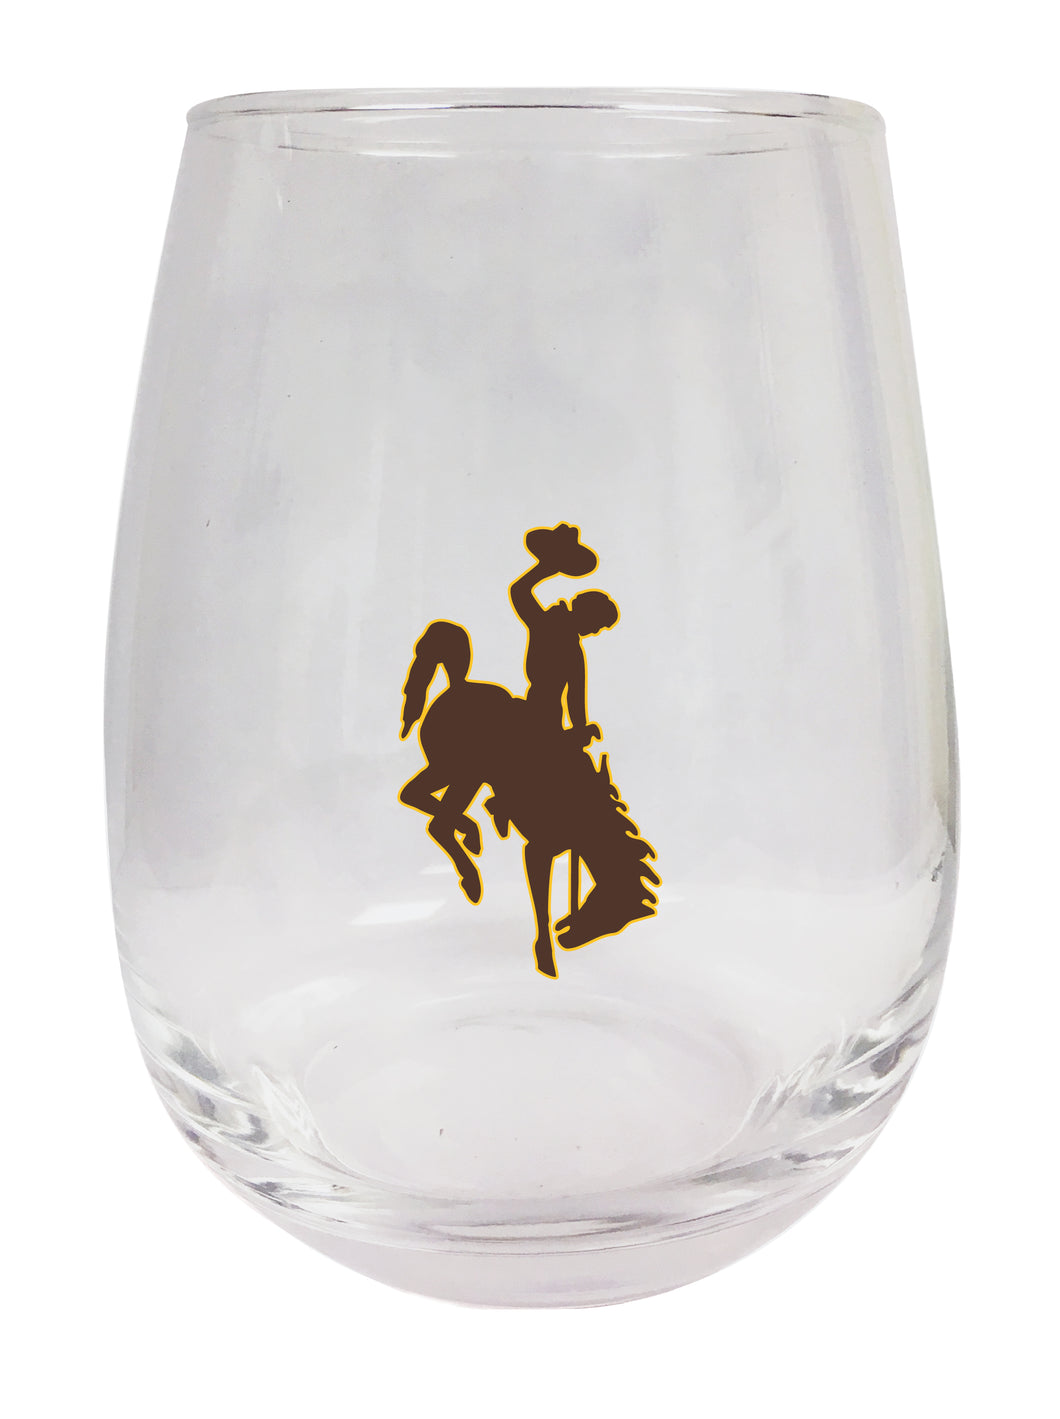 University of Wyoming Stemless Wine Glass - 9 oz. | Officially Licensed NCAA Merchandise